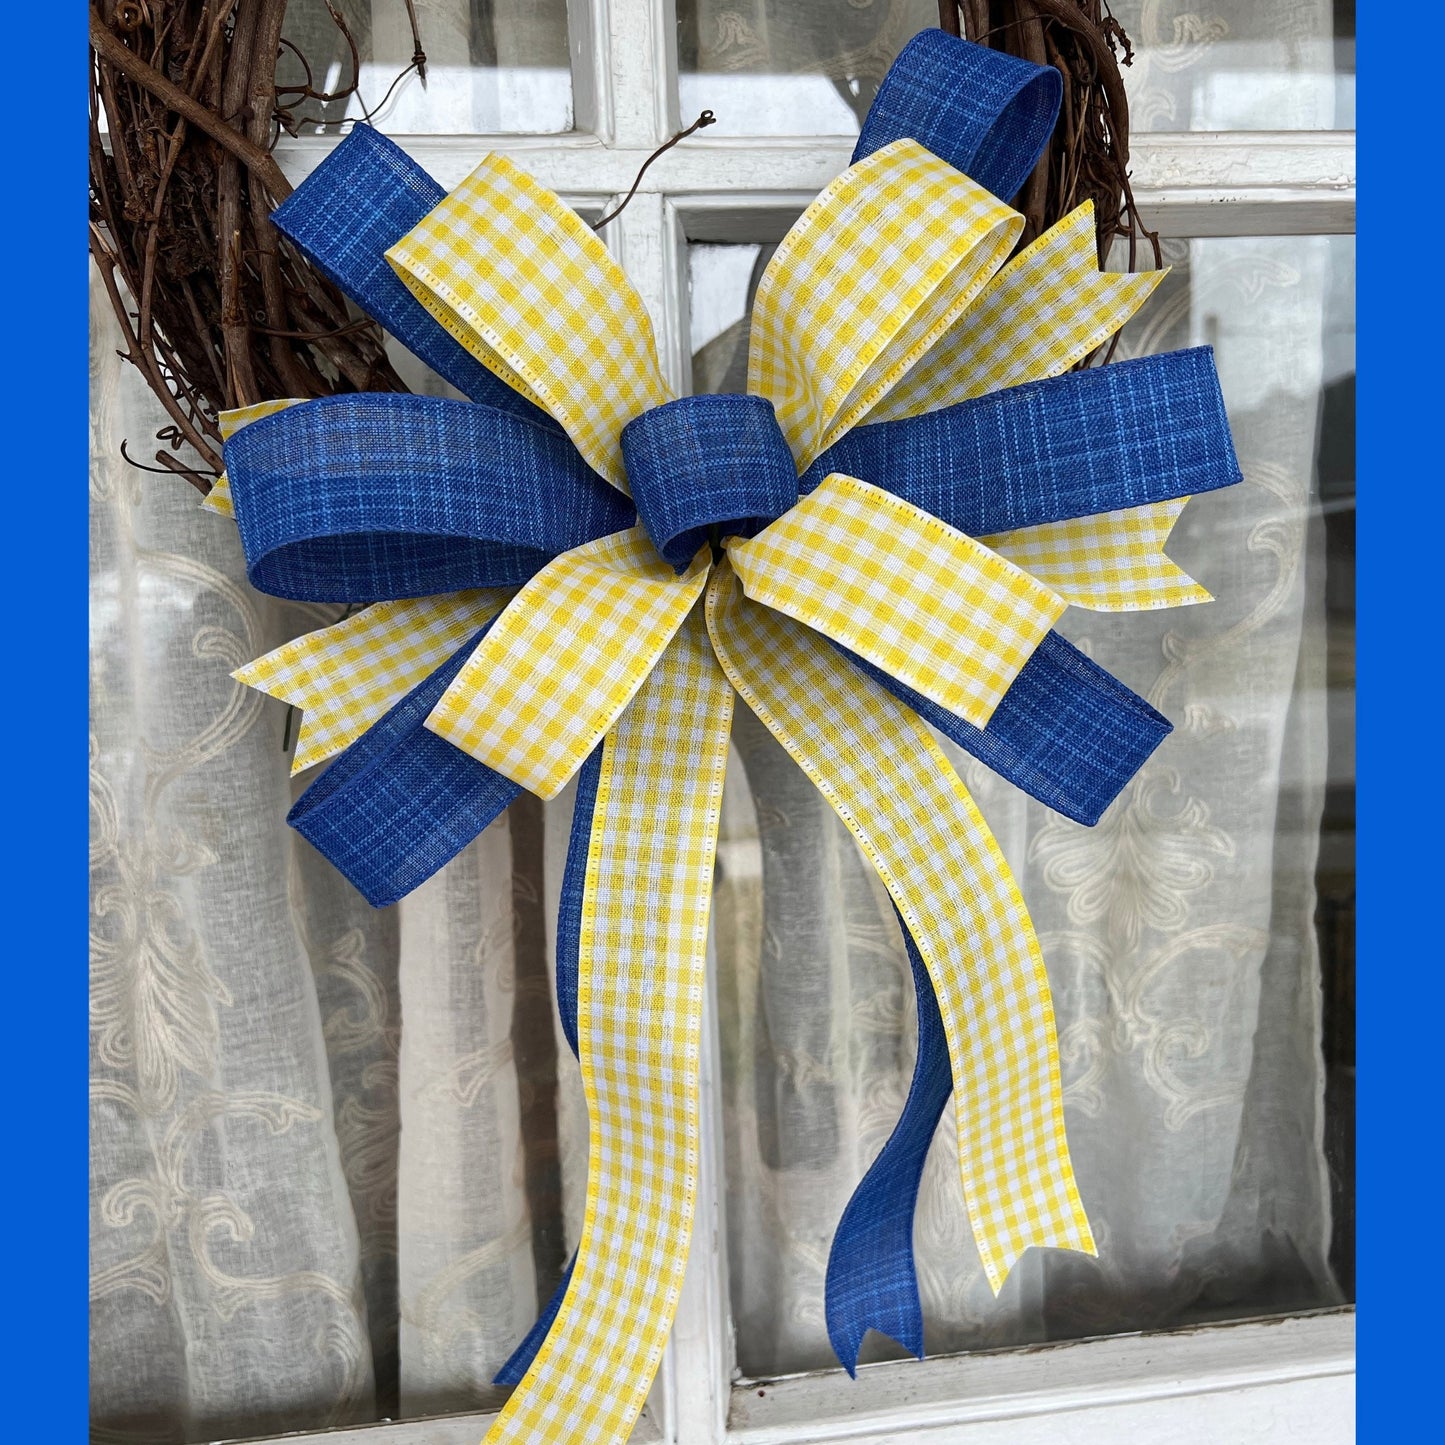 Ukraine Support Bow | Blue and Yellow Bow | 12 Inch Flat Bow | Stand with Ukraine | Mailbox Bow | Wreath Bow